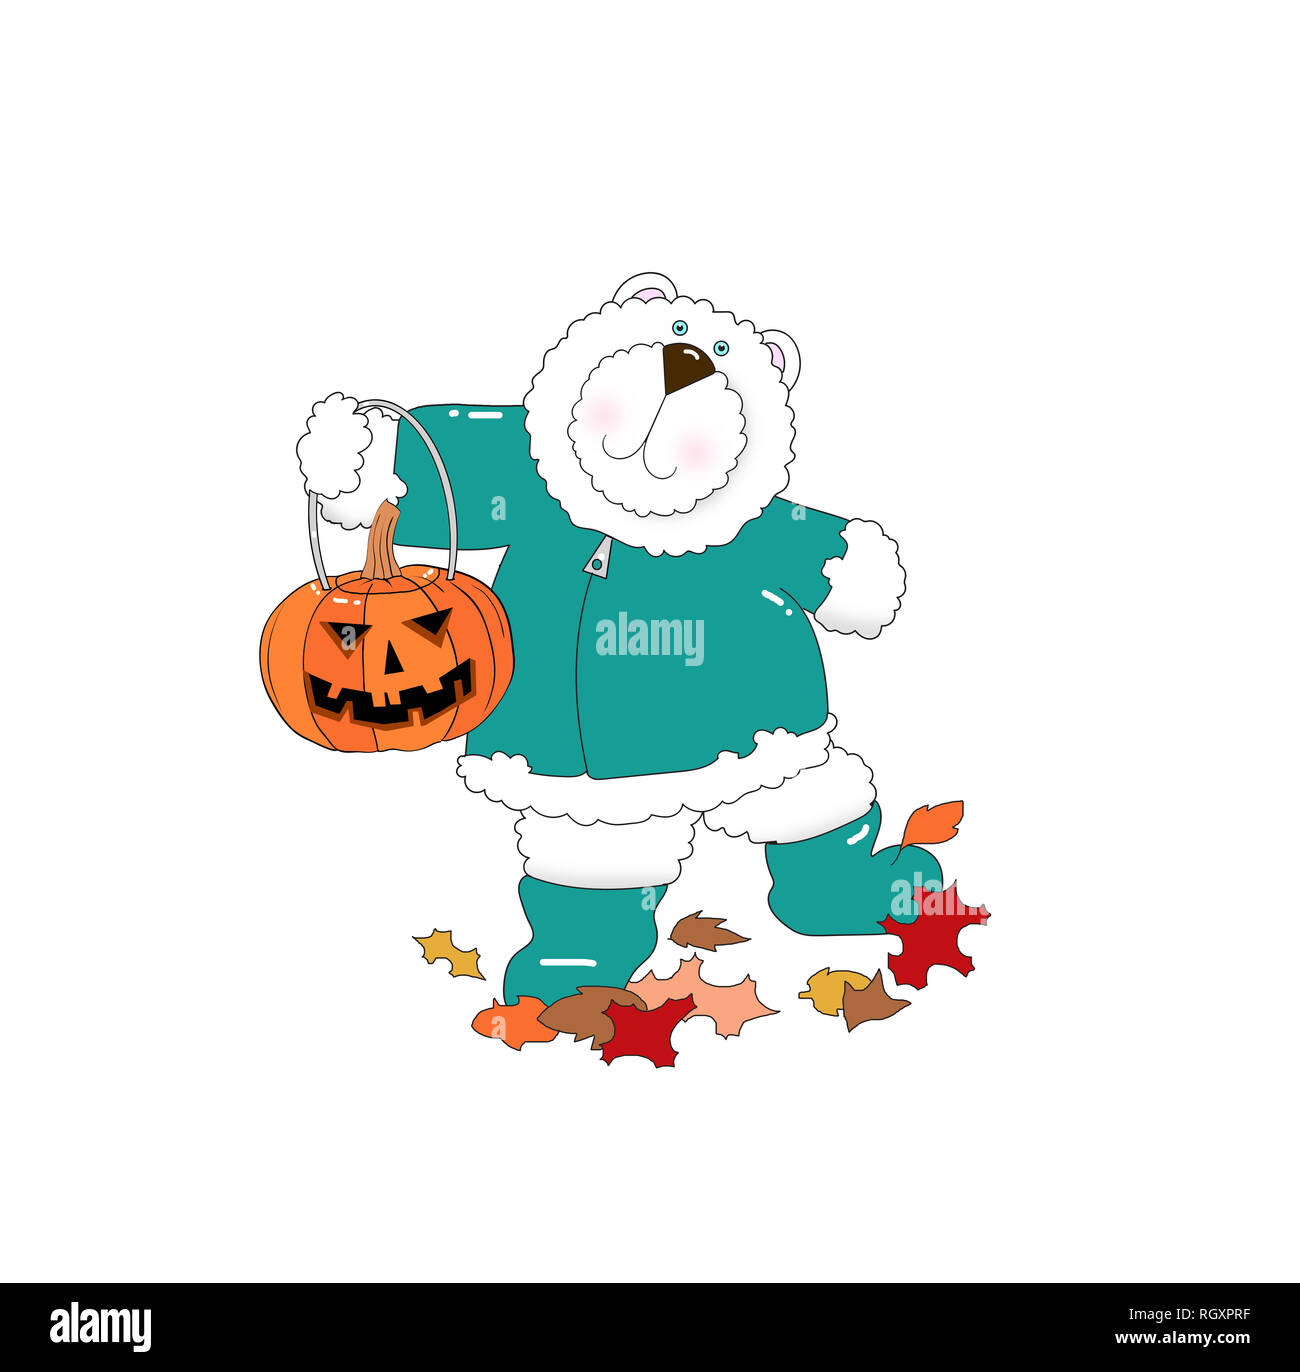 Illustration of a cute polar bear wearing clothes and holding a jack-o-lantern on a white background Stock Photo